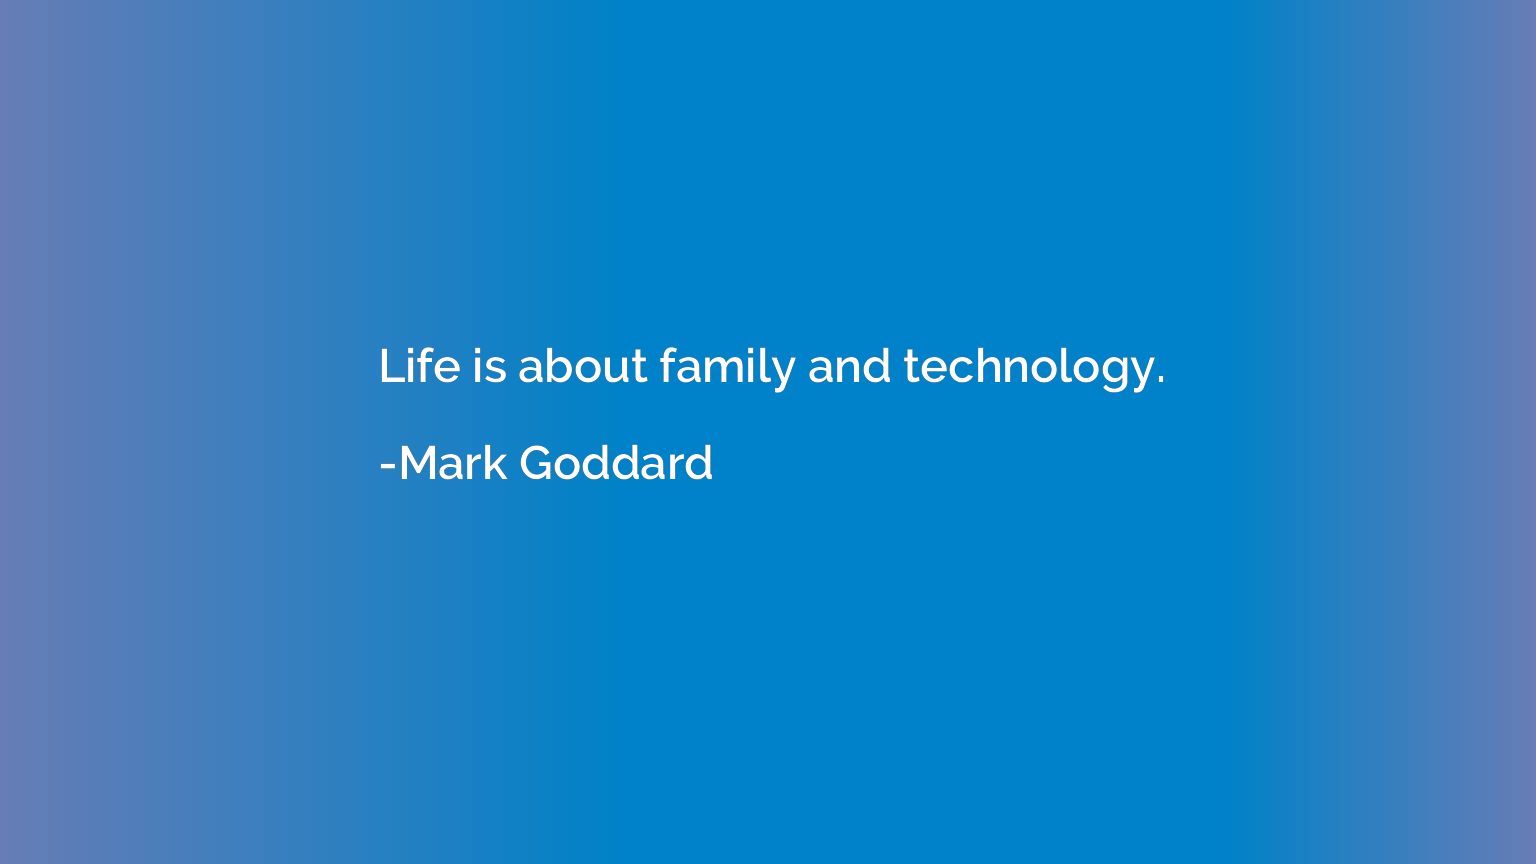 Life is about family and technology.